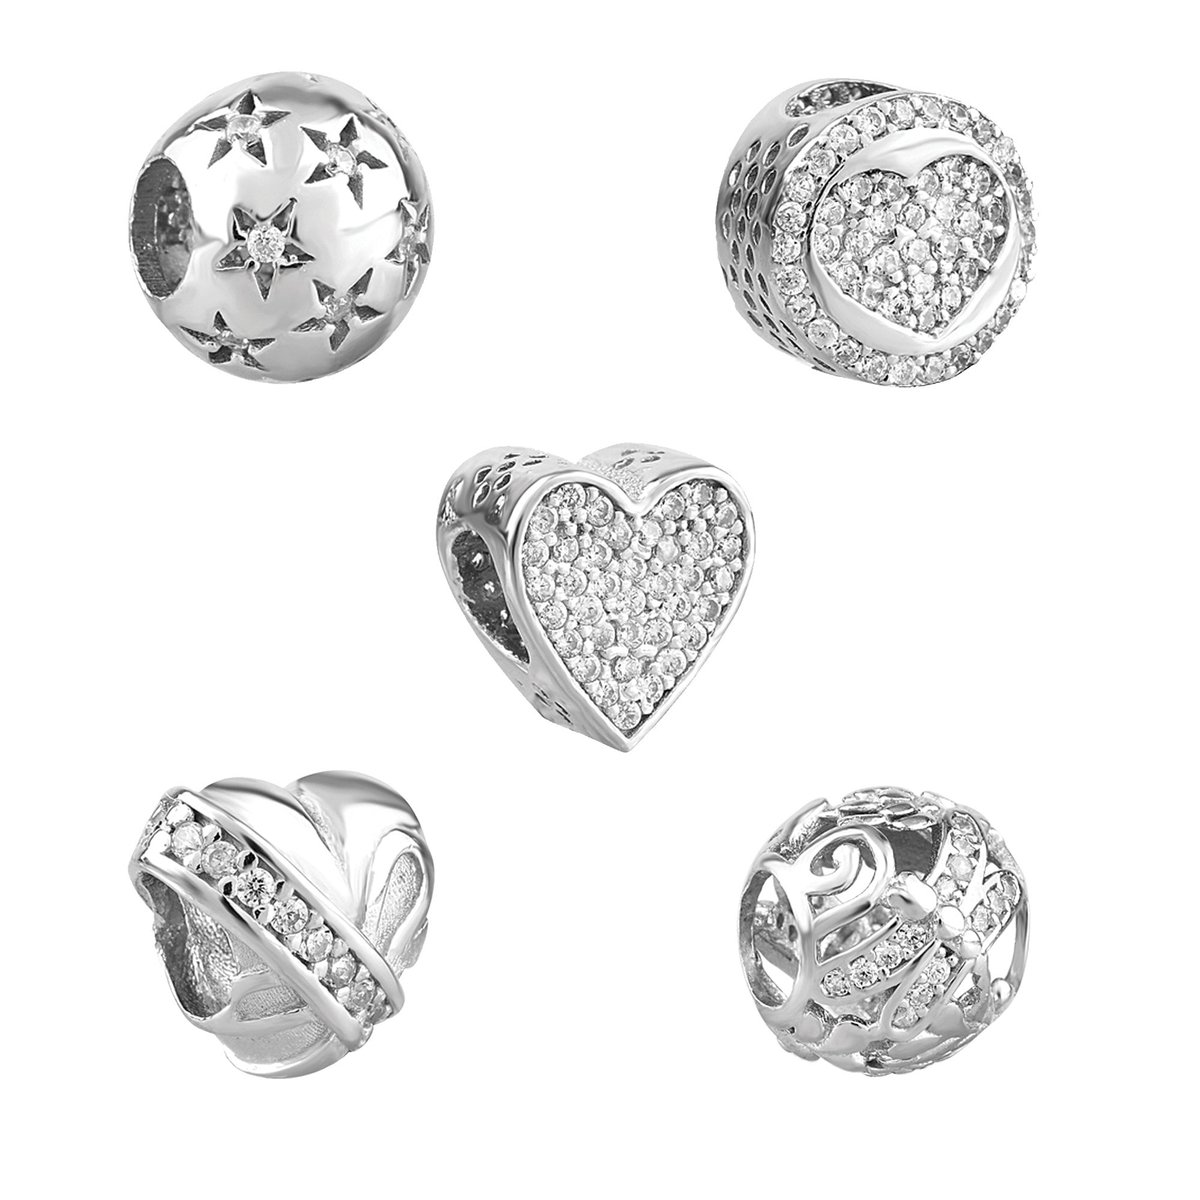 Excited to share the latest addition to my #etsy shop: Ball Beads for Charm Bracelets - 925 Sterling Silver etsy.me/3Y8rXqU #silver #valentinesday #lovefriendship #ballbeads #charmbracelets #sterlingsilver #lovecharms #solidsilver #roundbead